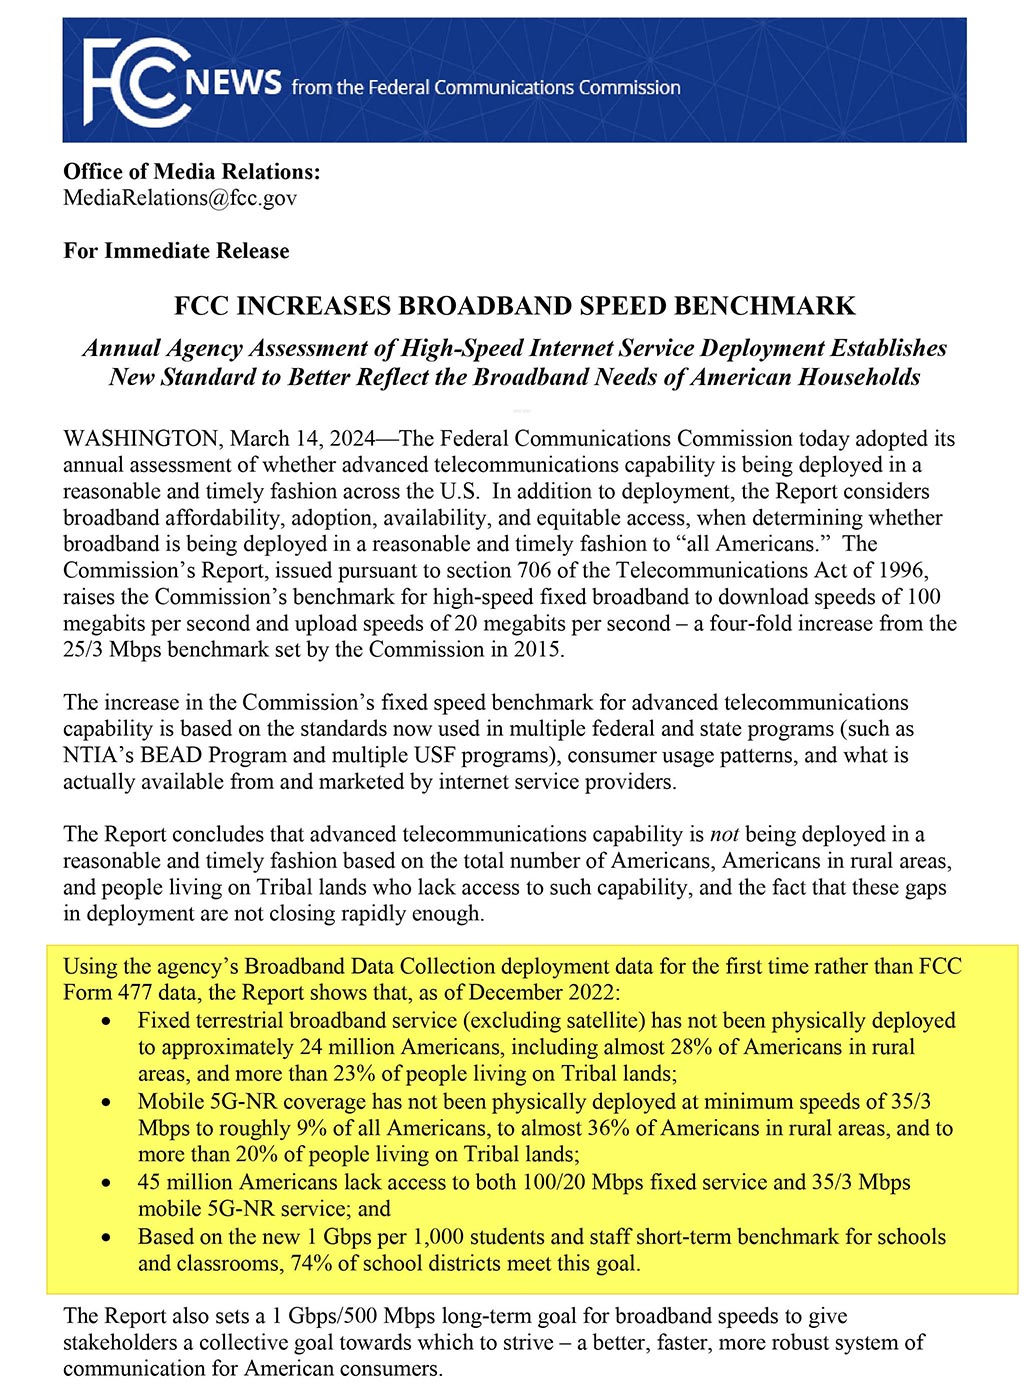 FCC Recommends 100 Mbps as Minimum Speed Official Statement